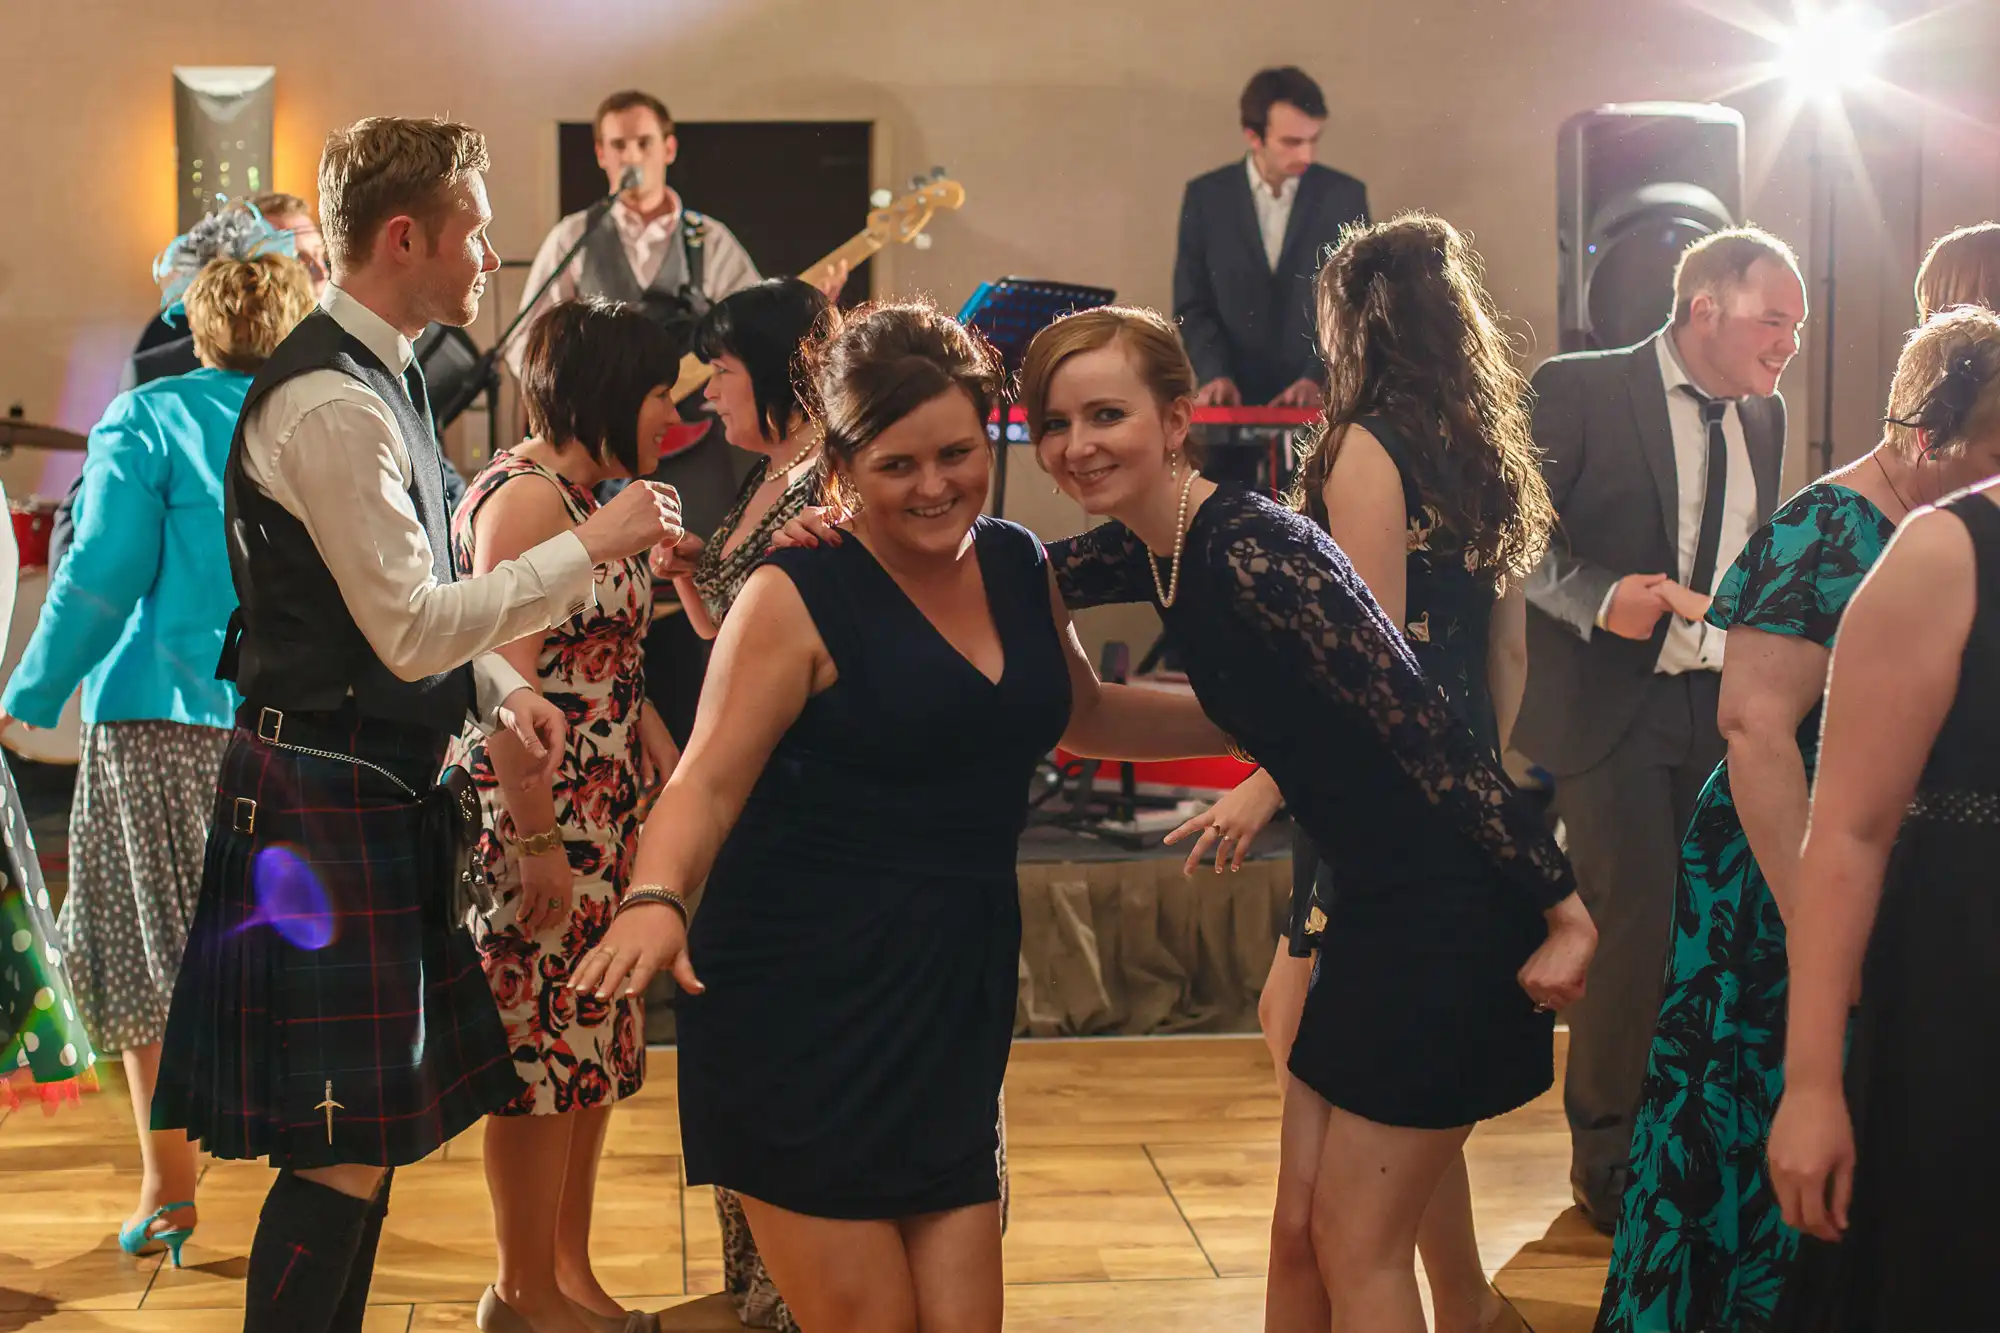 People dancing and smiling at a festive indoor event with a live band playing in the background. some men wear kilts and women are in dresses.